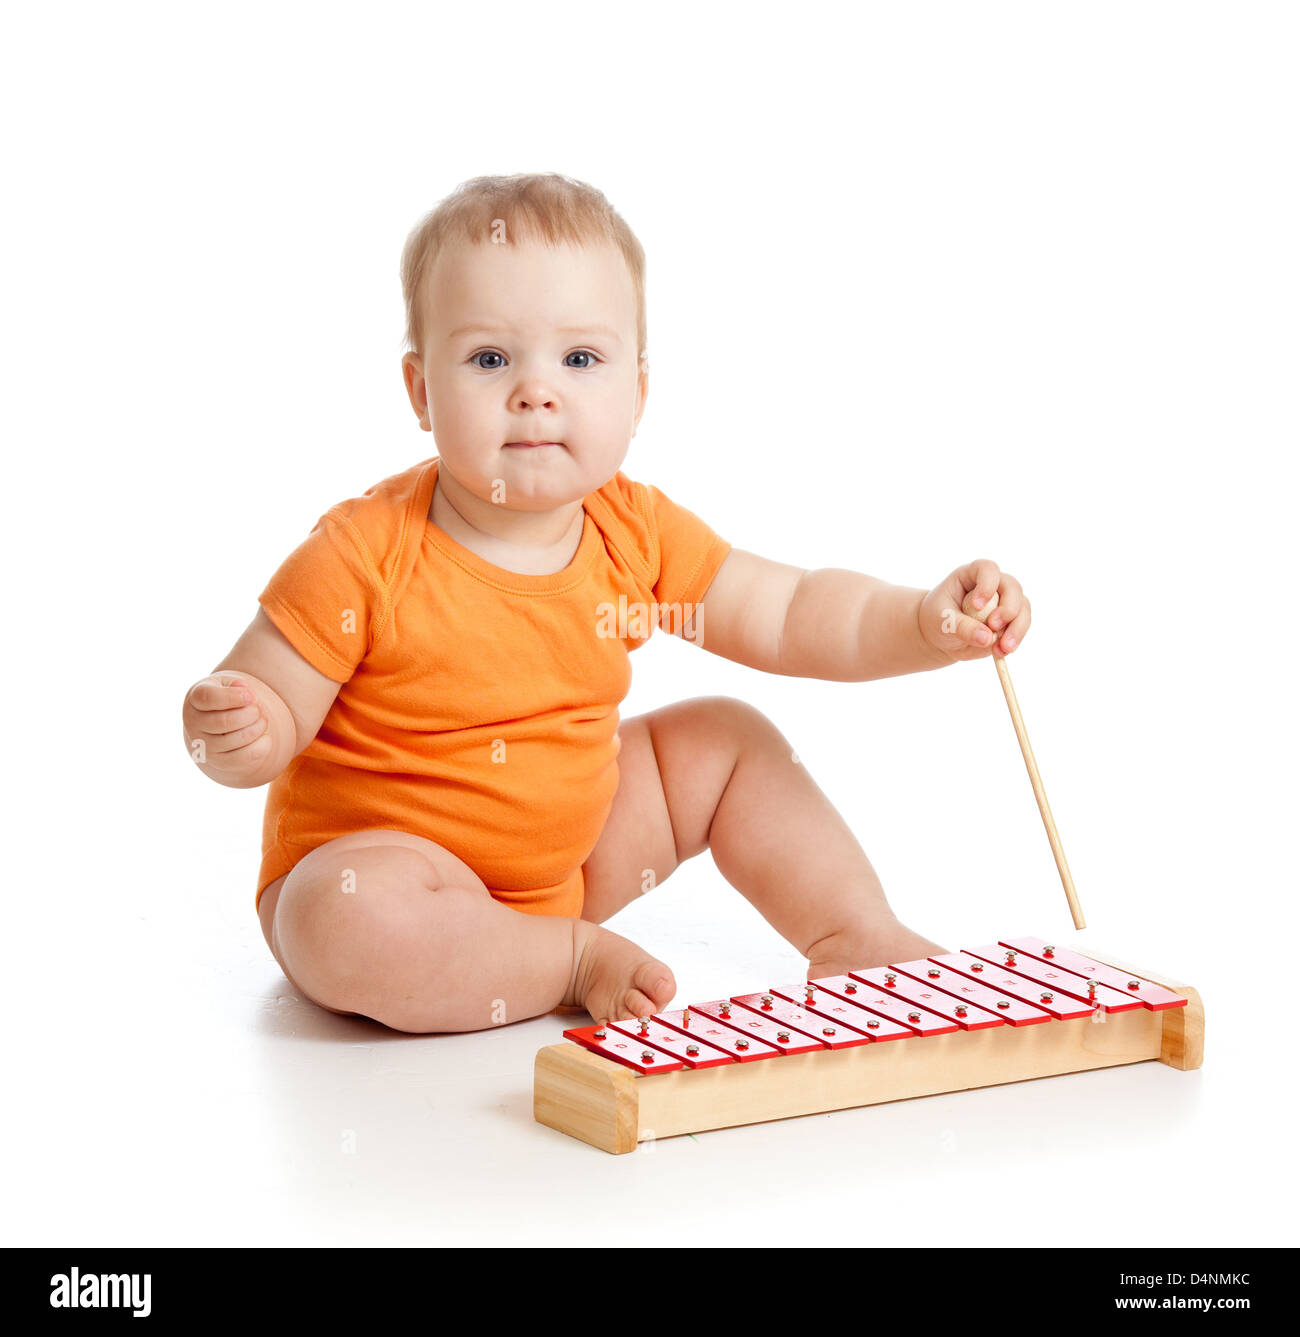 baby playing with musical toy Stock Photo